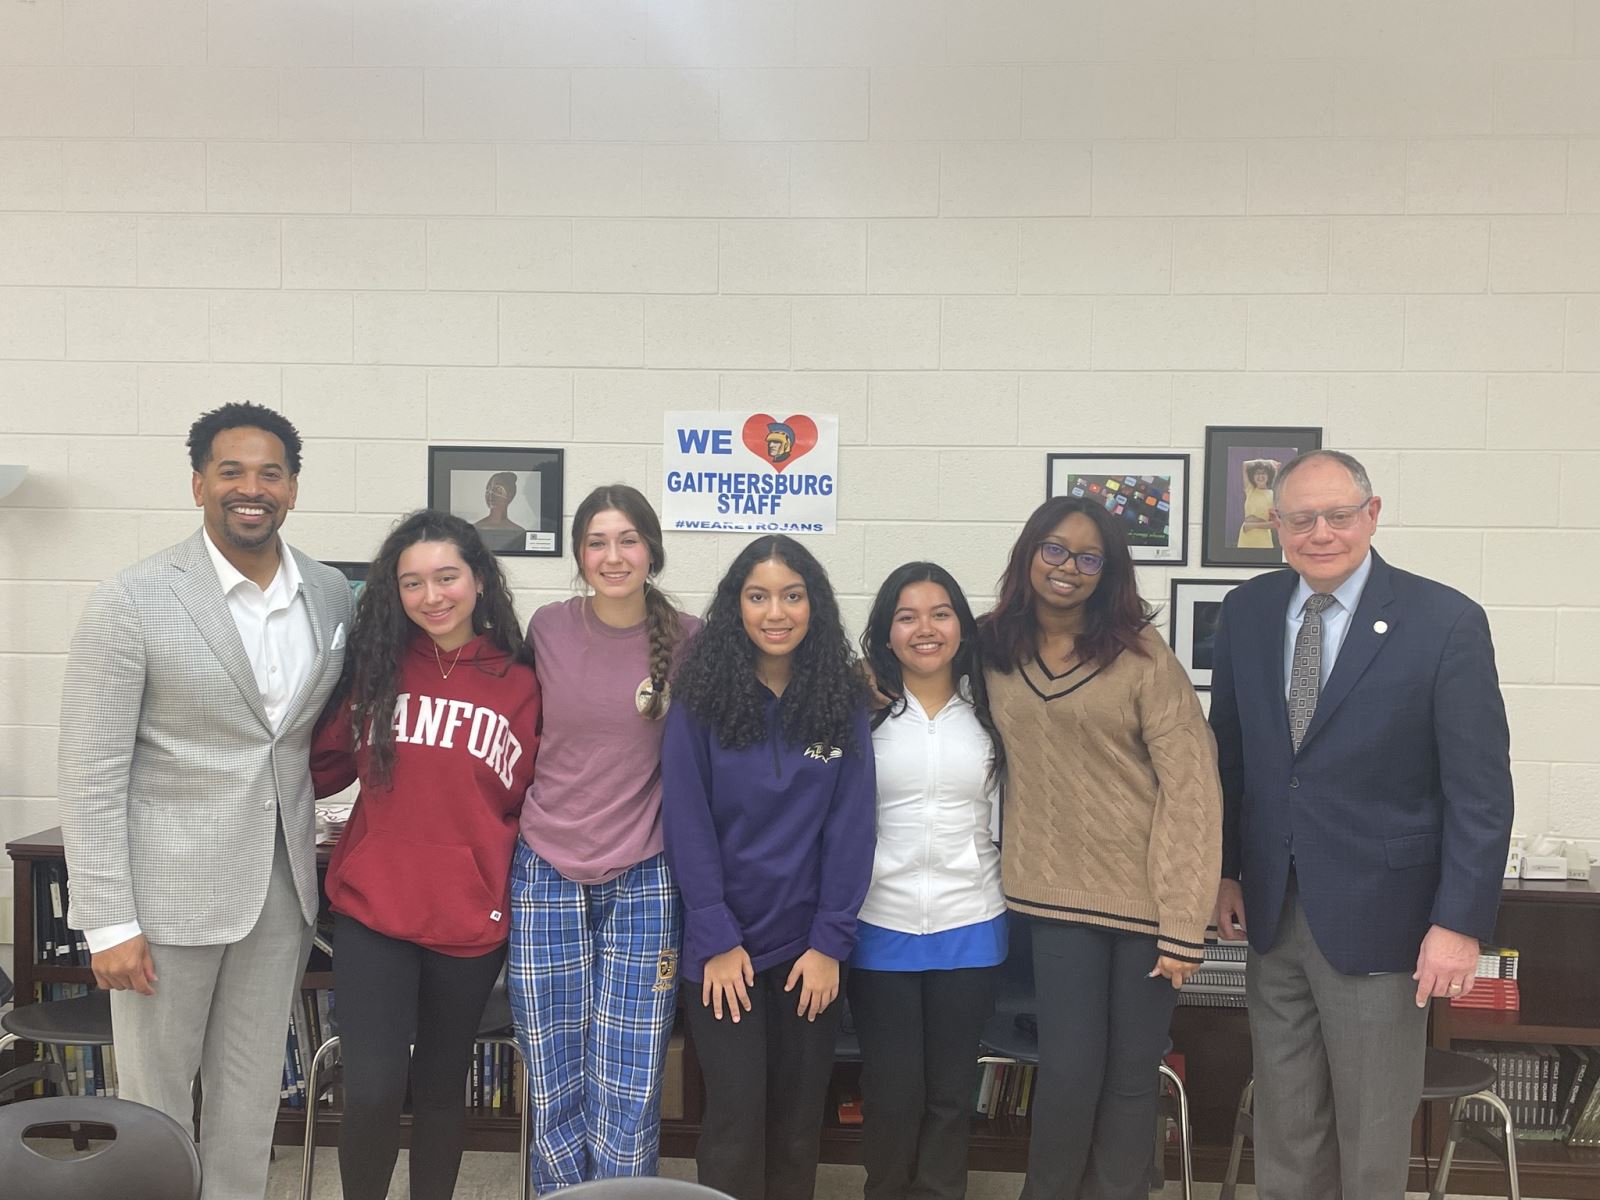 Councilmember Jawando, Councilmember Katz, and Gaithersburg High School students smile at the camera.